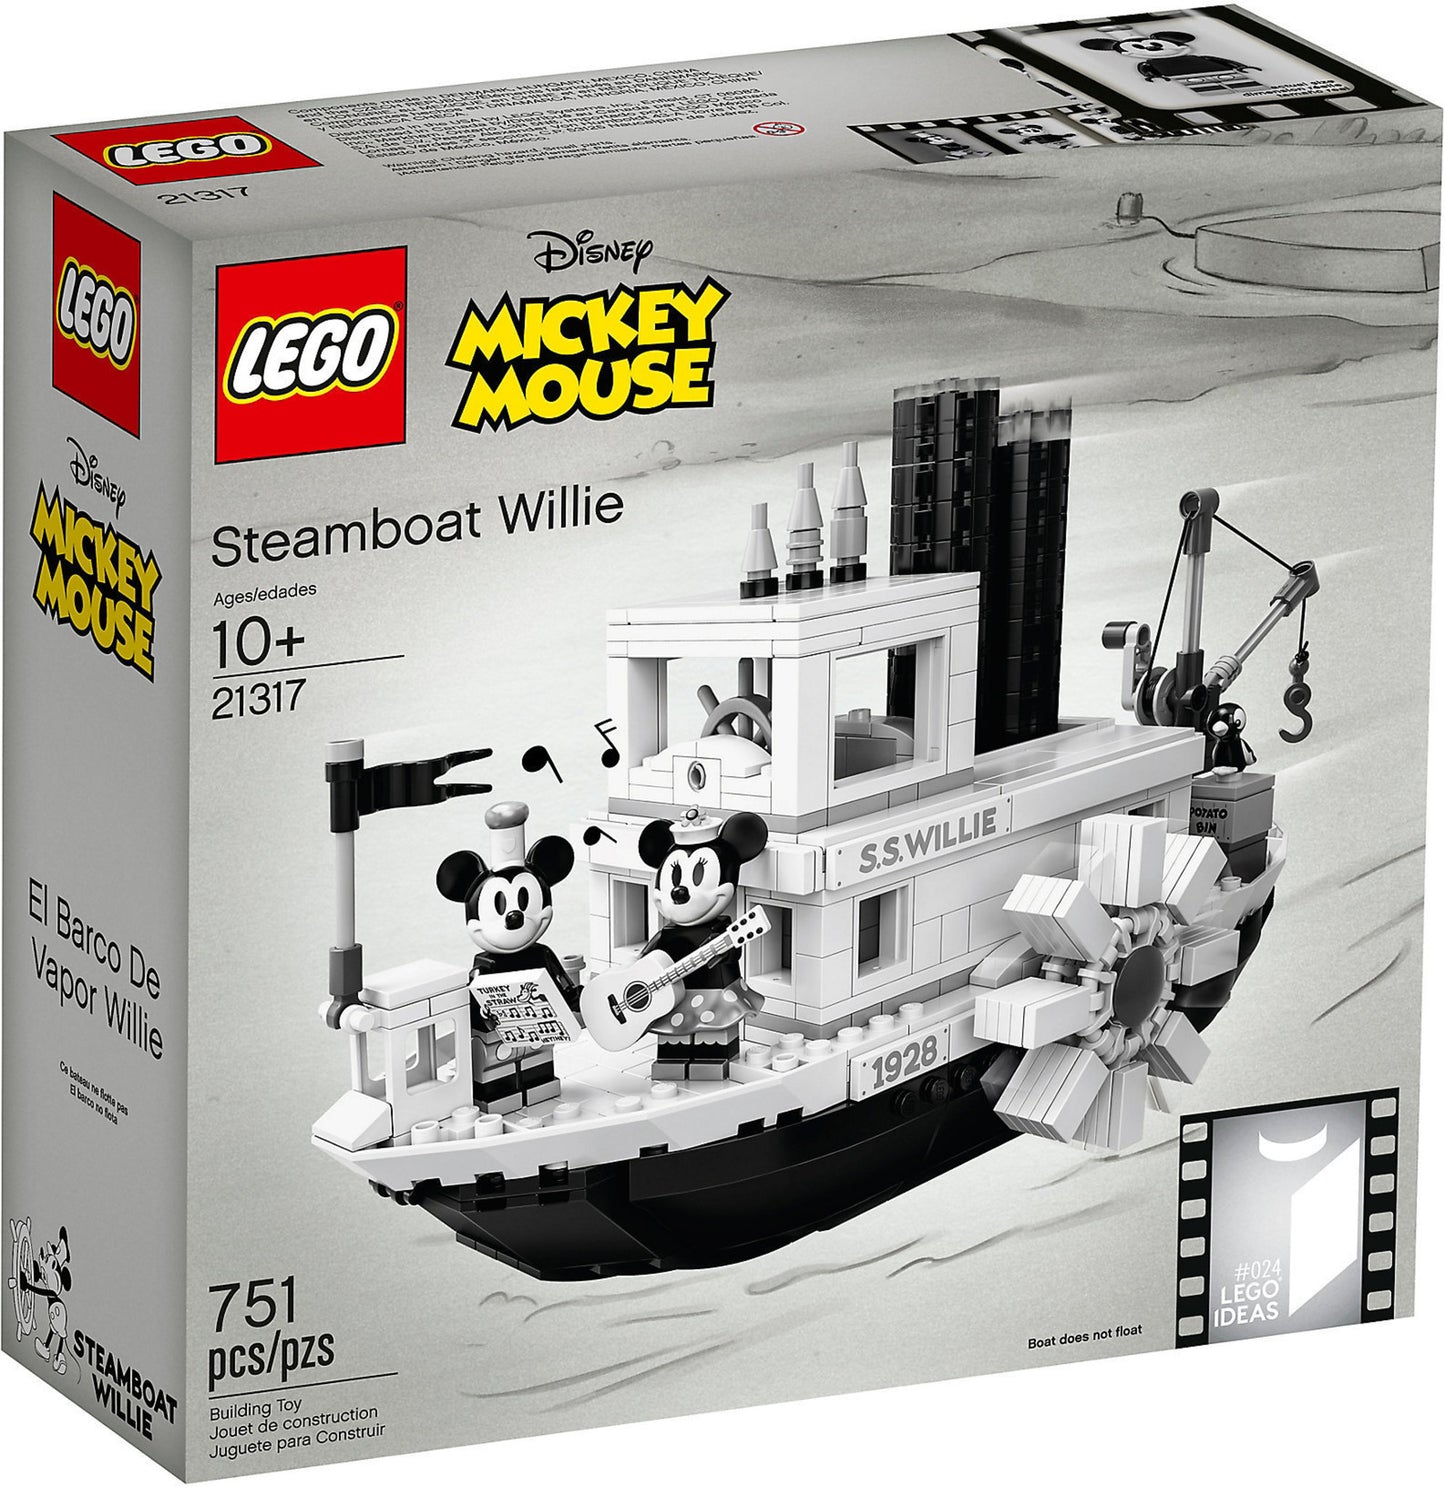 21317 LEGO Ideas - Steamboat Willie